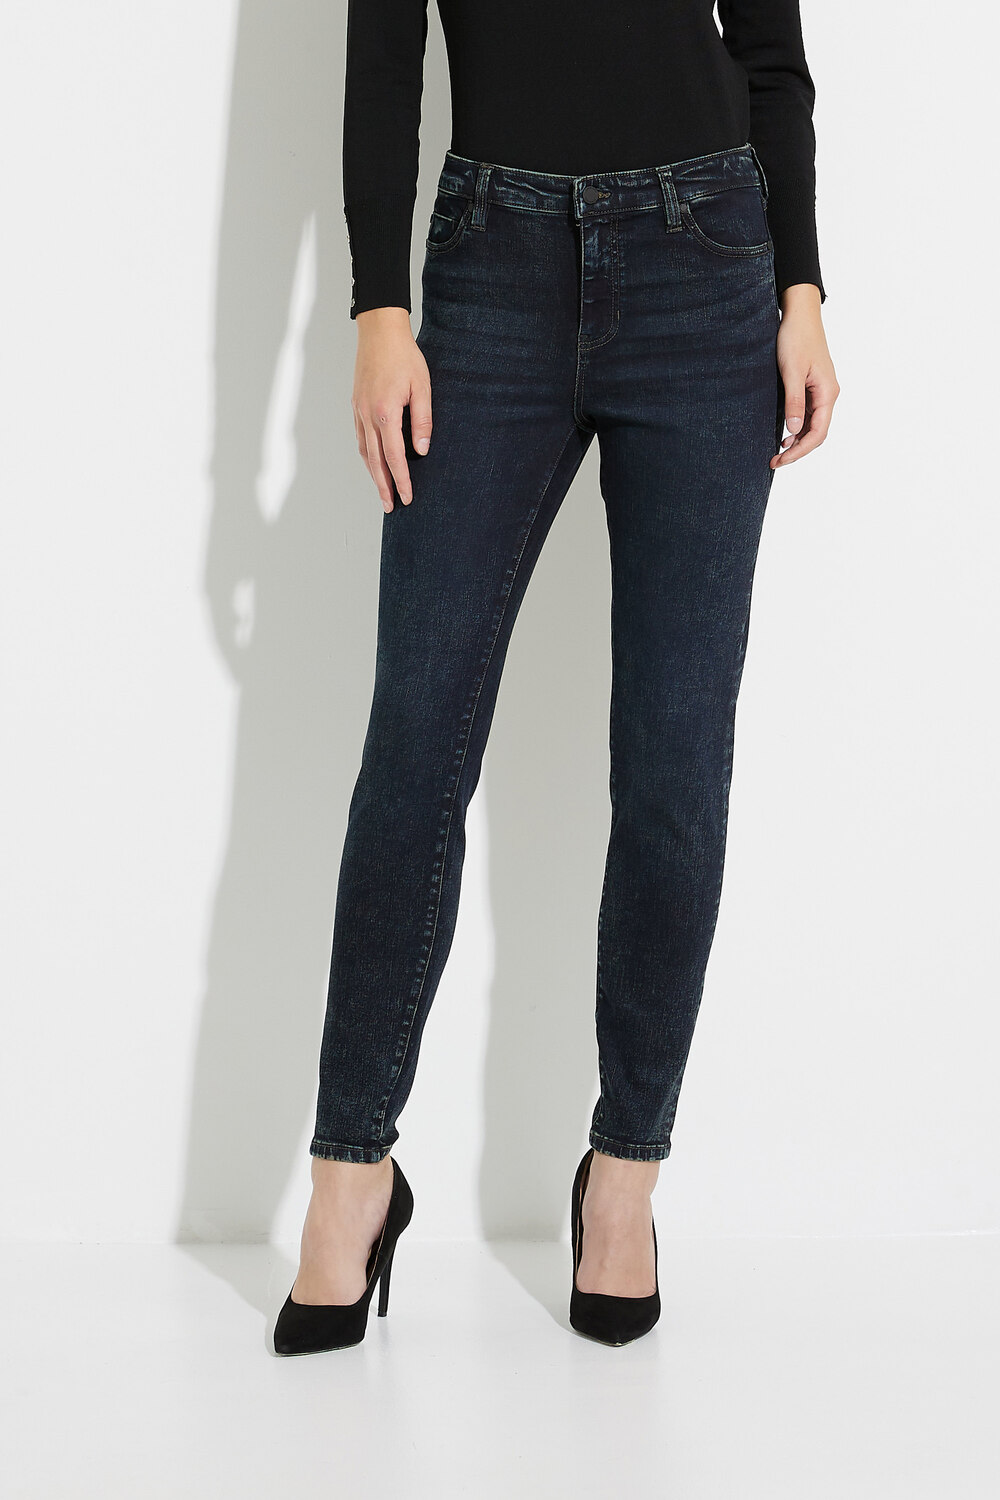 Jeans skinny taille haute modèle LM2000EW. Yellowstone